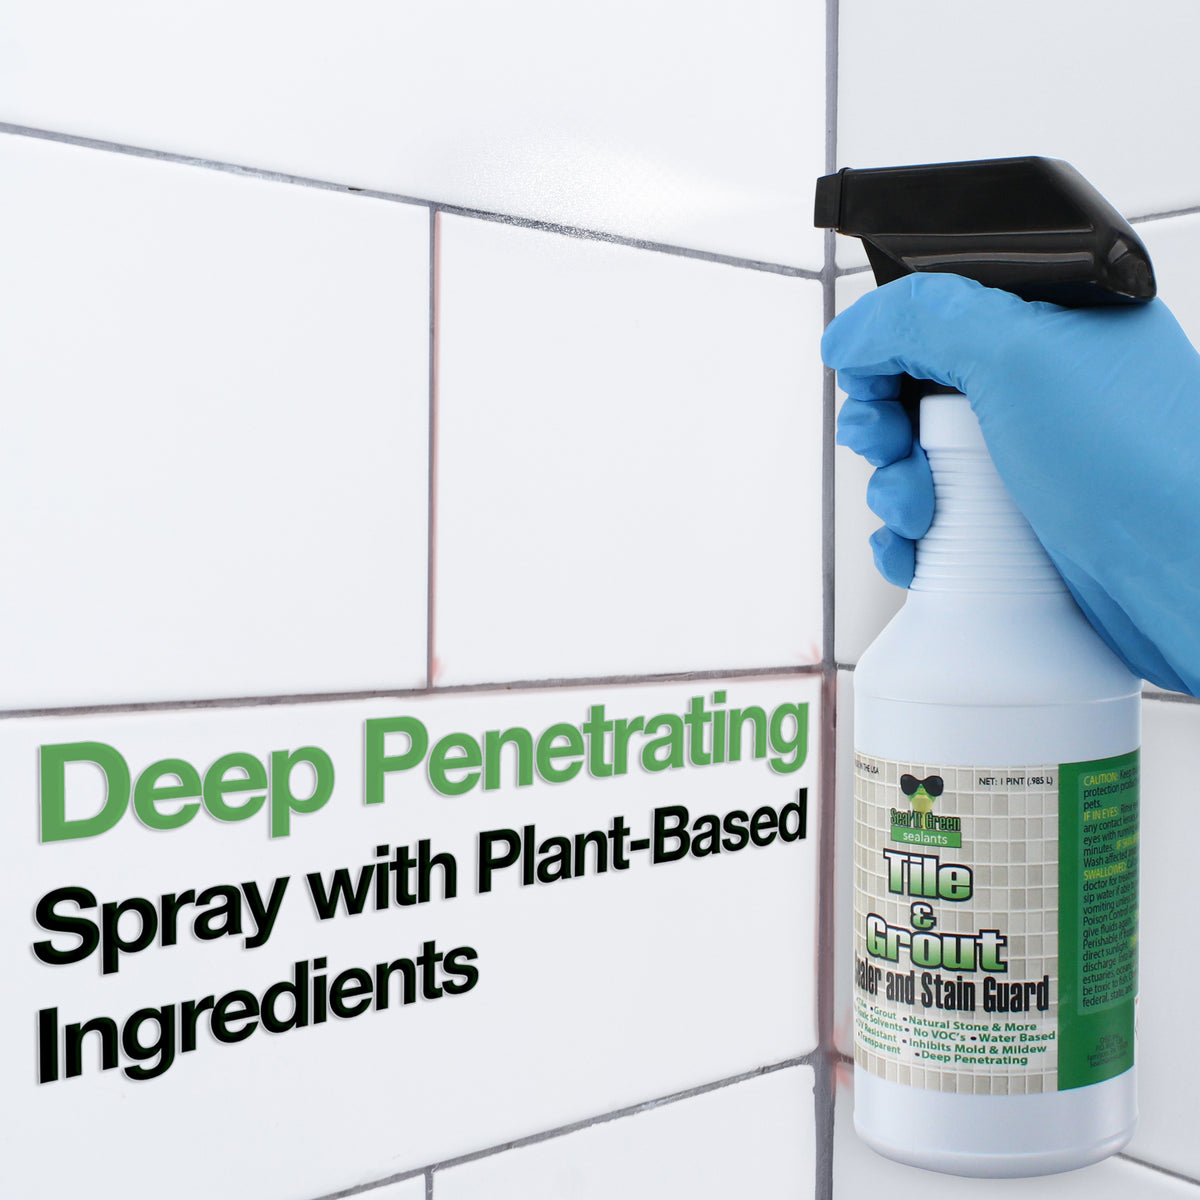 Deep Penetrating - Spray with plant-based ingredients